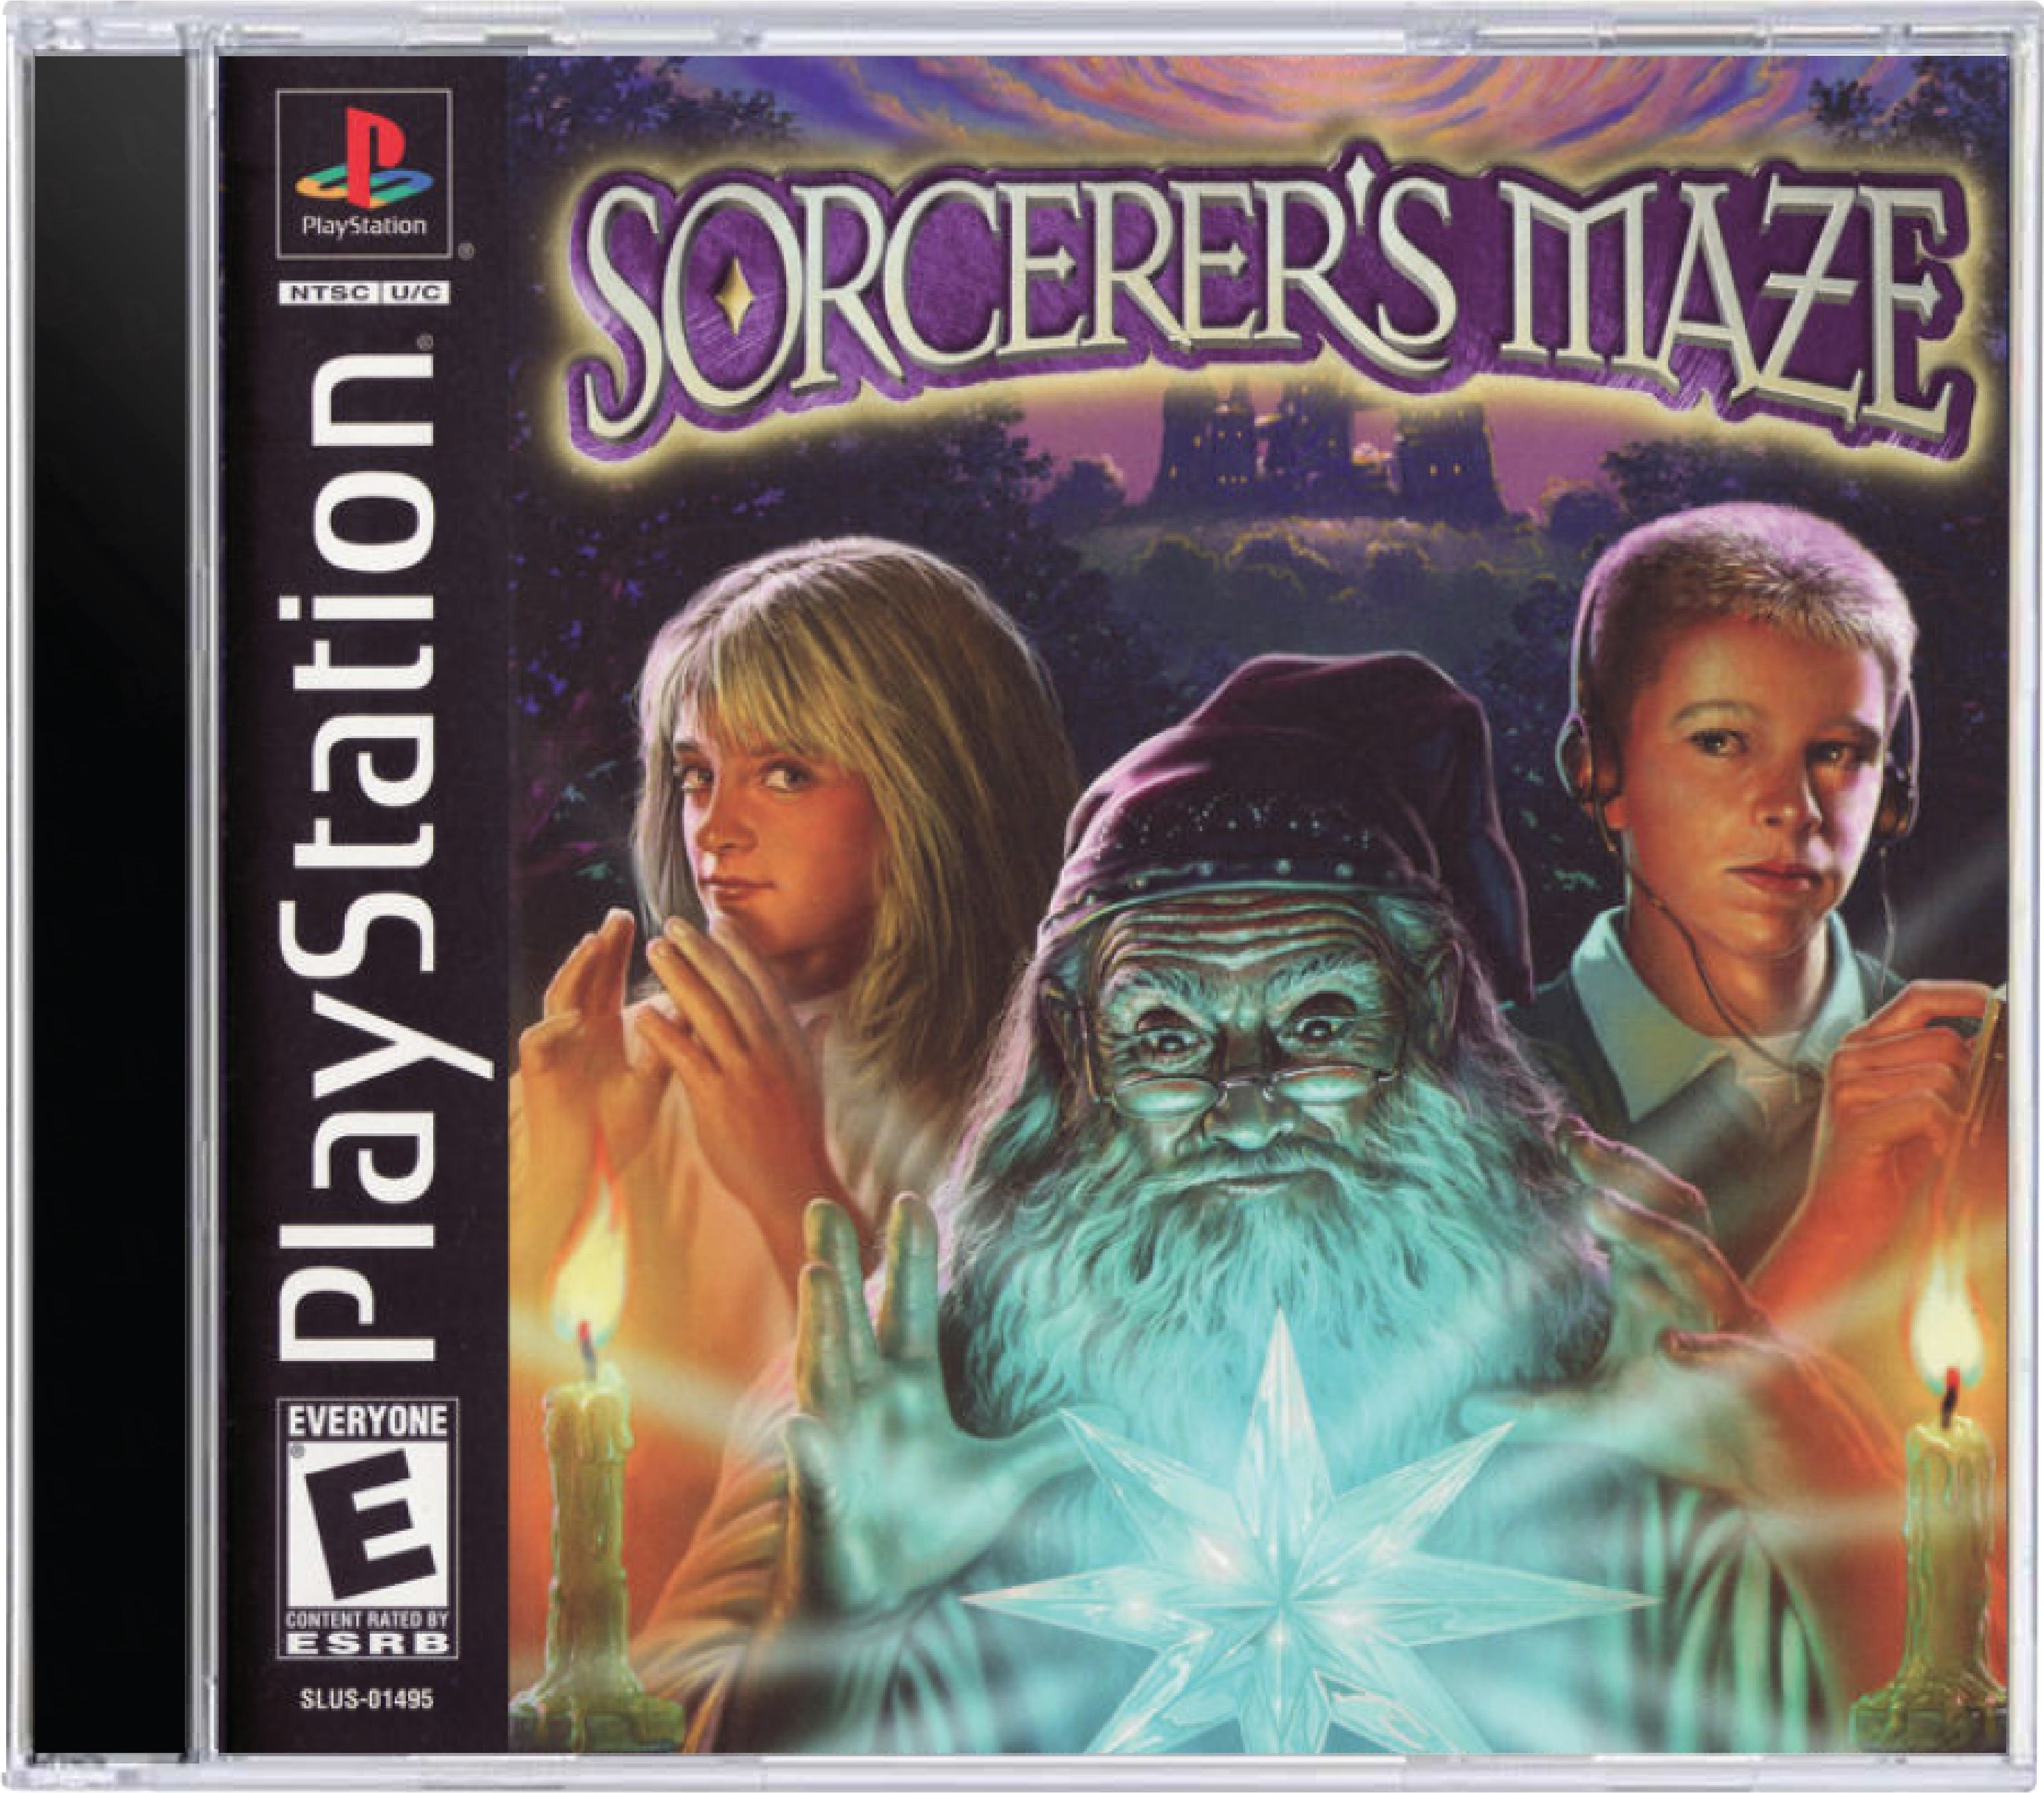 Sorcerer's Maze Cover Art and Product Photo